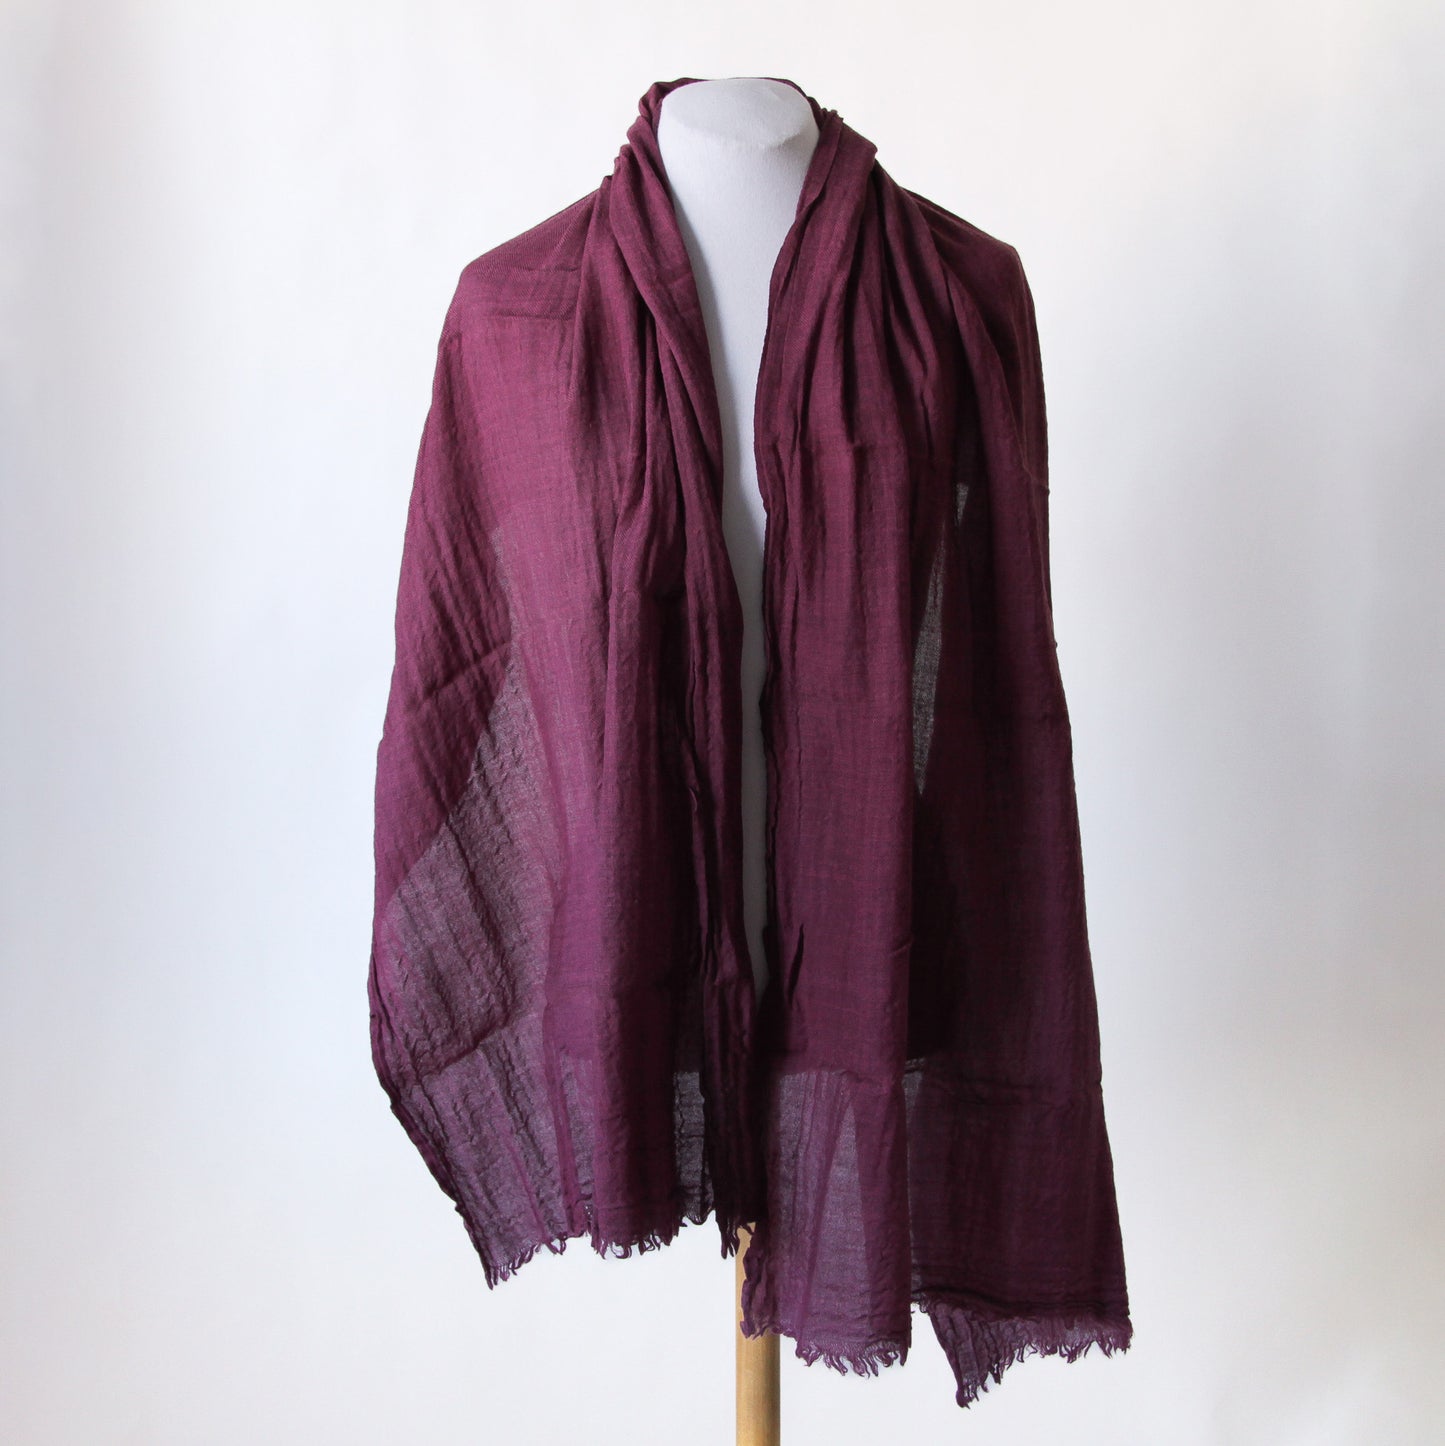 Naturally Dyed Merino Wool Scarf - Lilac